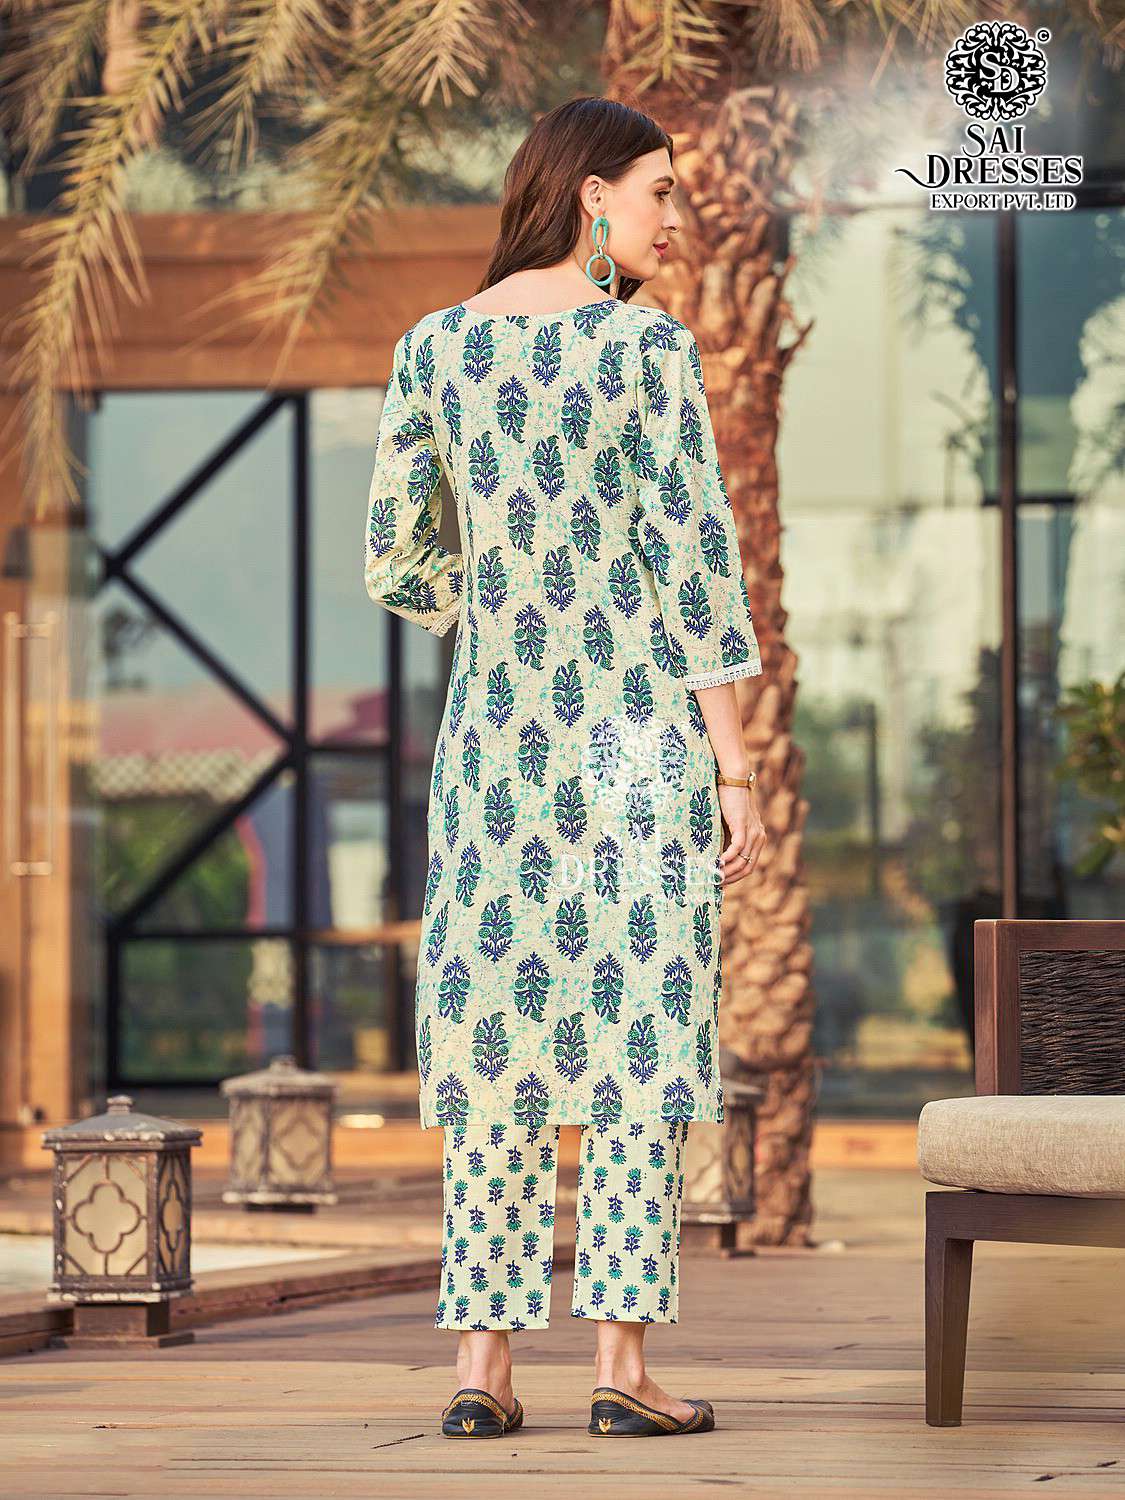 SAI DRESSES PRESENT COTTON CANDY VOL 1 READY TO DAILY WEAR PURE COTTON PRINTED KURTI WITH PANT IN WHOLESALE RATE IN SURAT